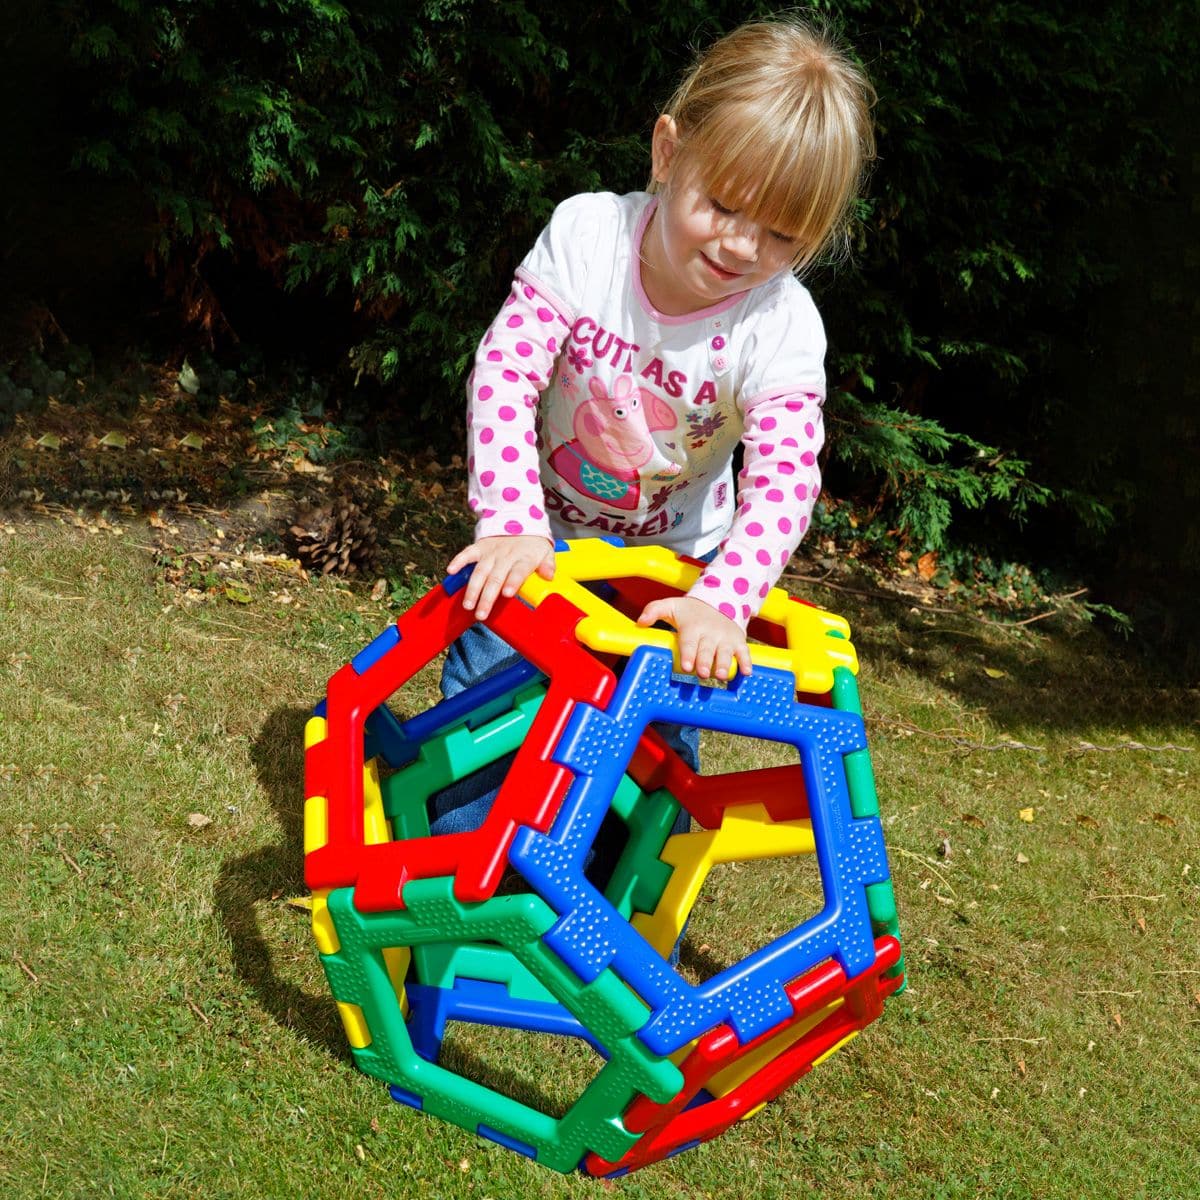 Giant Polydron Pentagon Set, Introducing the Giant Polydron Pentagon Set, the perfect addition to the renowned Giant Polydron construction range. This set takes creativity and learning to new heights, allowing children to explore and construct a whole new array of shapes and structures.With the inclusion of pentagons in this set, young builders can expand their design possibilities and create unique and varied shapes. From making enormous balls to constructing the five Platonic Solids by combining the penta